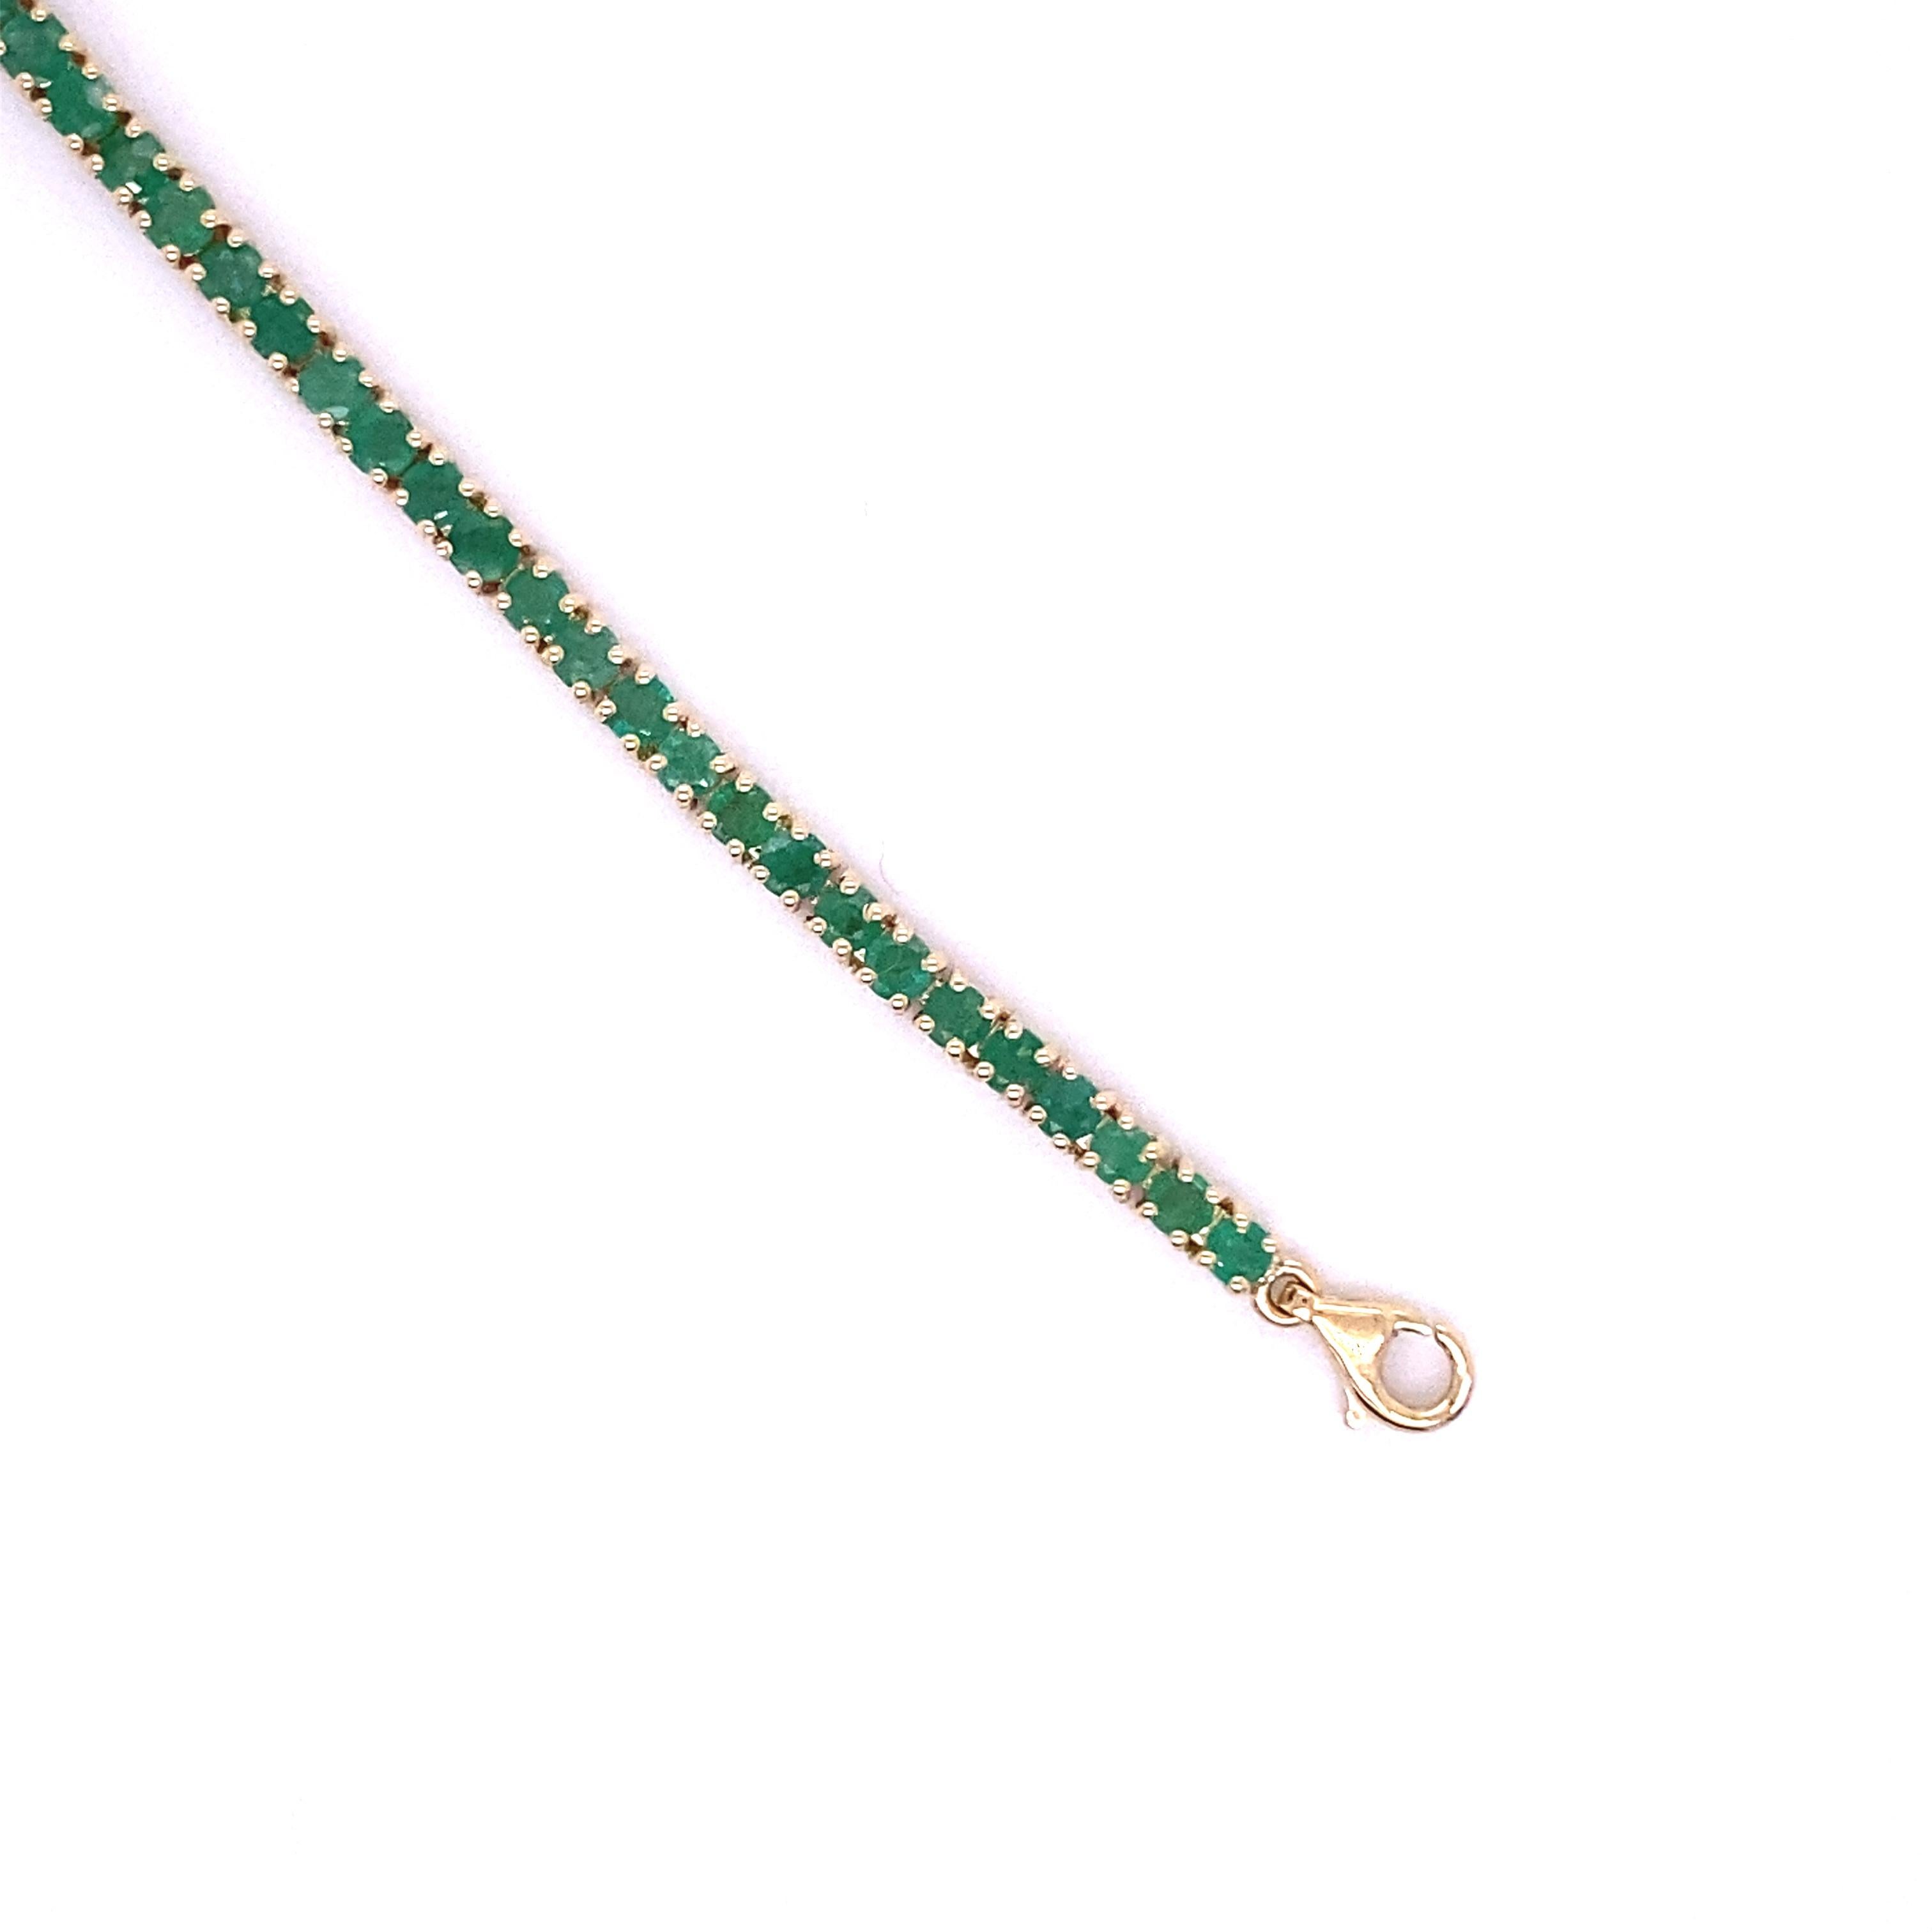 Add a bold pop of color to your look with this tennis bracelet. Its unique design features a row of emeralds set in a 14K yellow gold setting. The round emeralds prong set along a 14K yellow gold chain. This bracelet is a must-have for a woman who